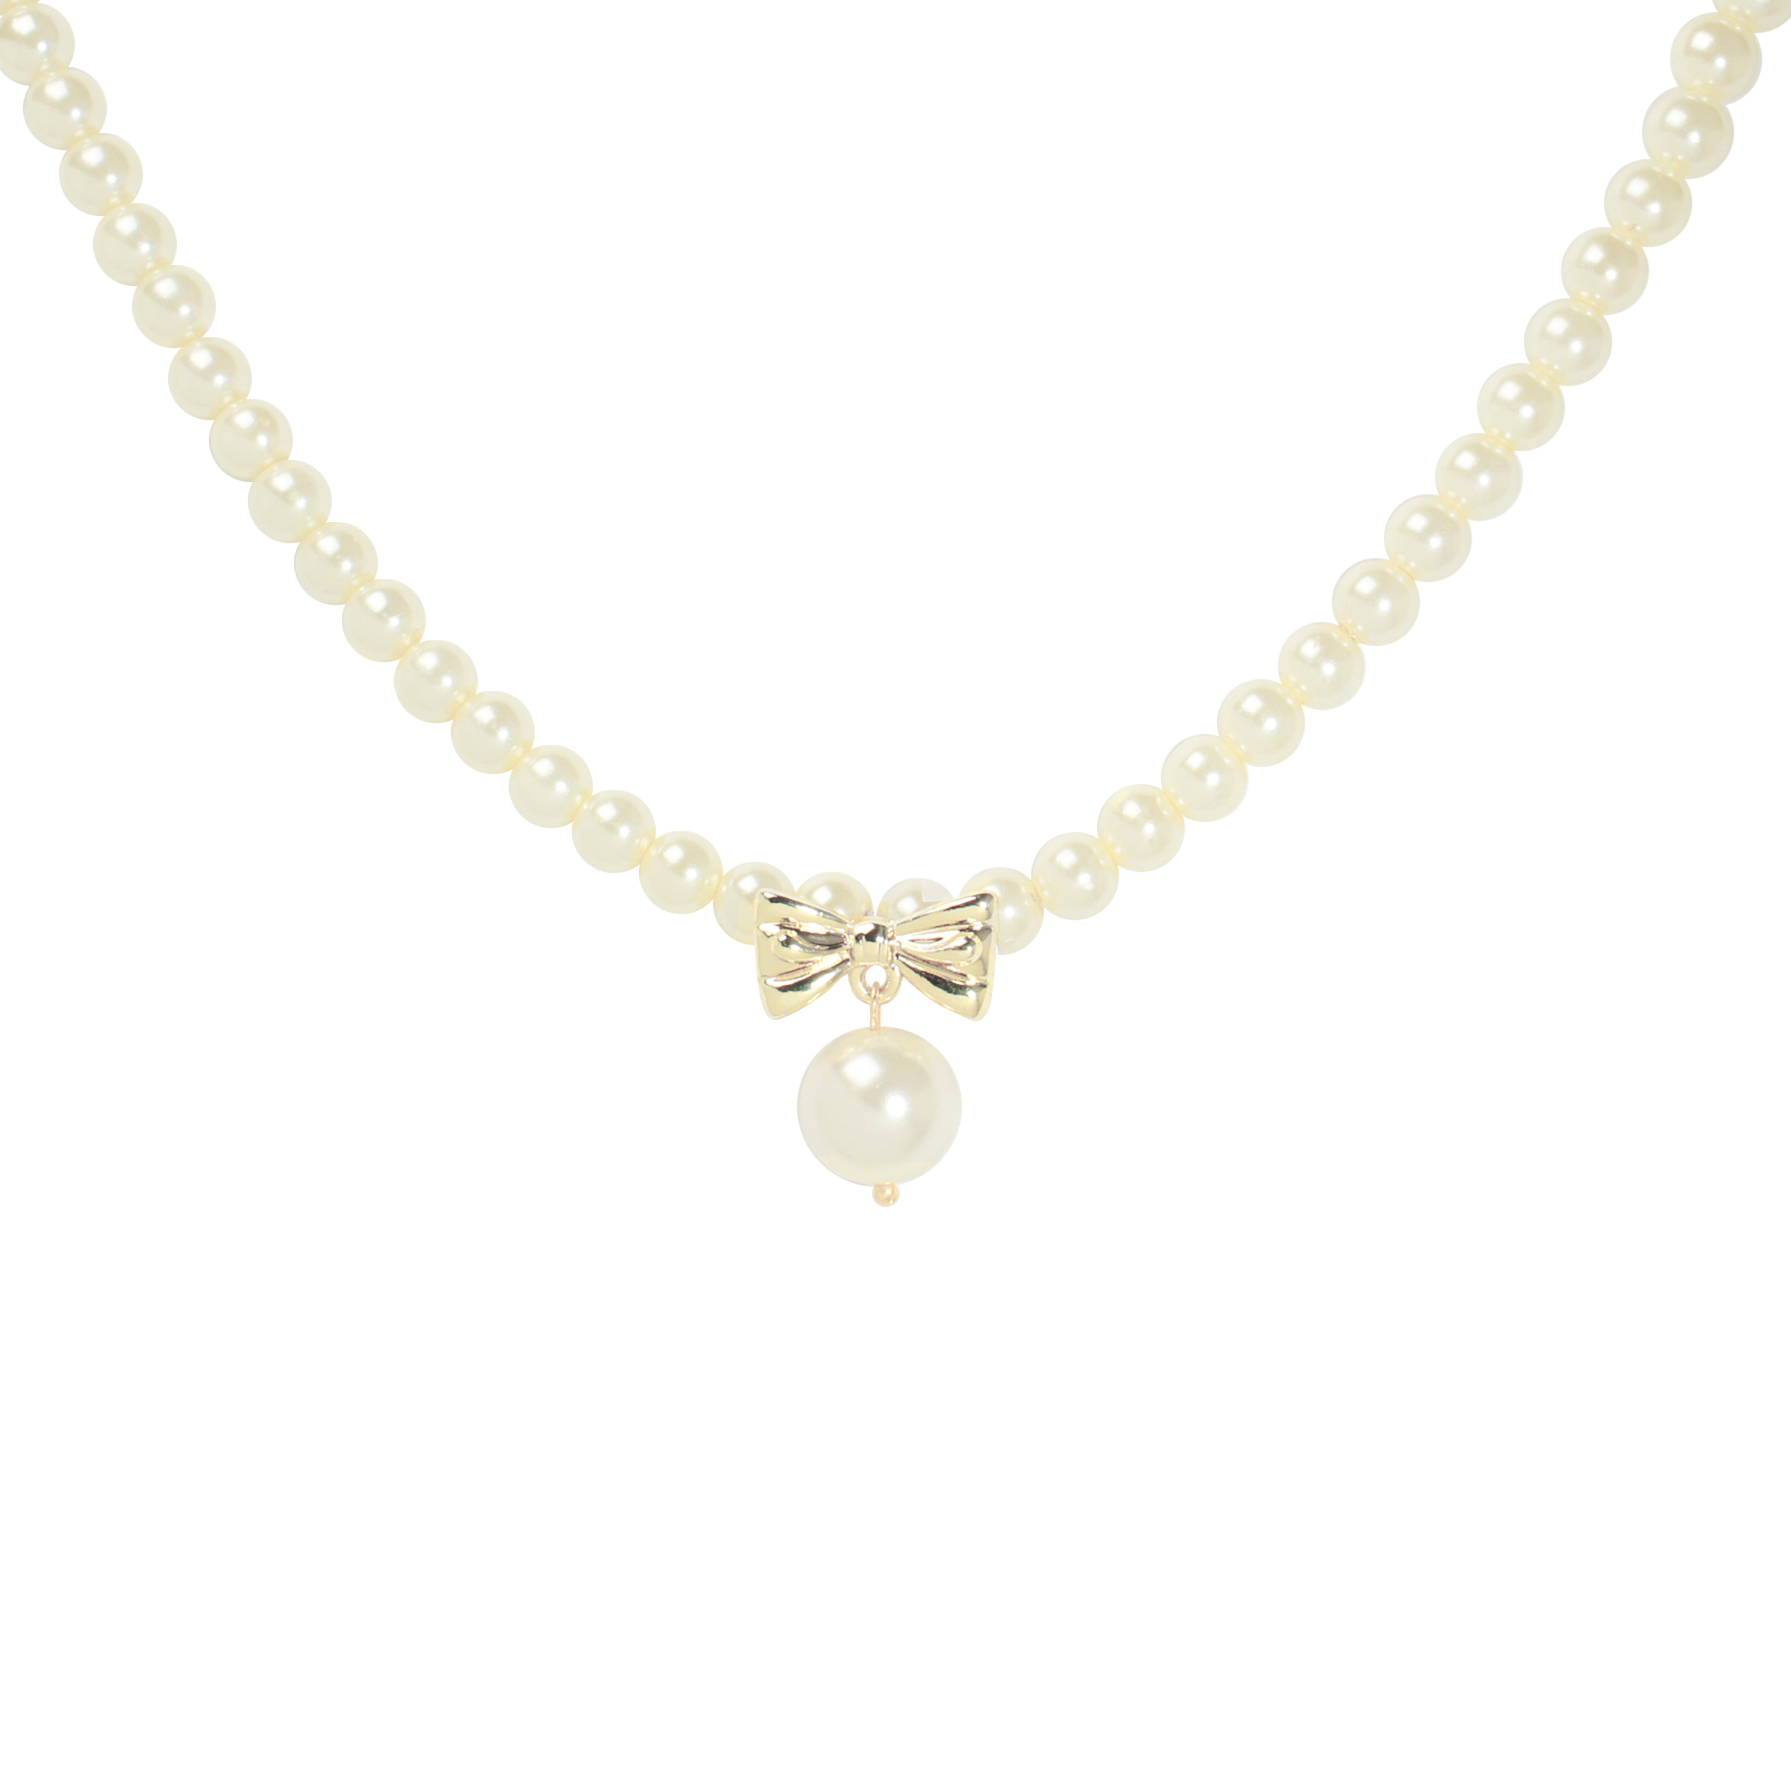 Ballerina Pearl Necklace with Golden Bow and Pearl Pendant